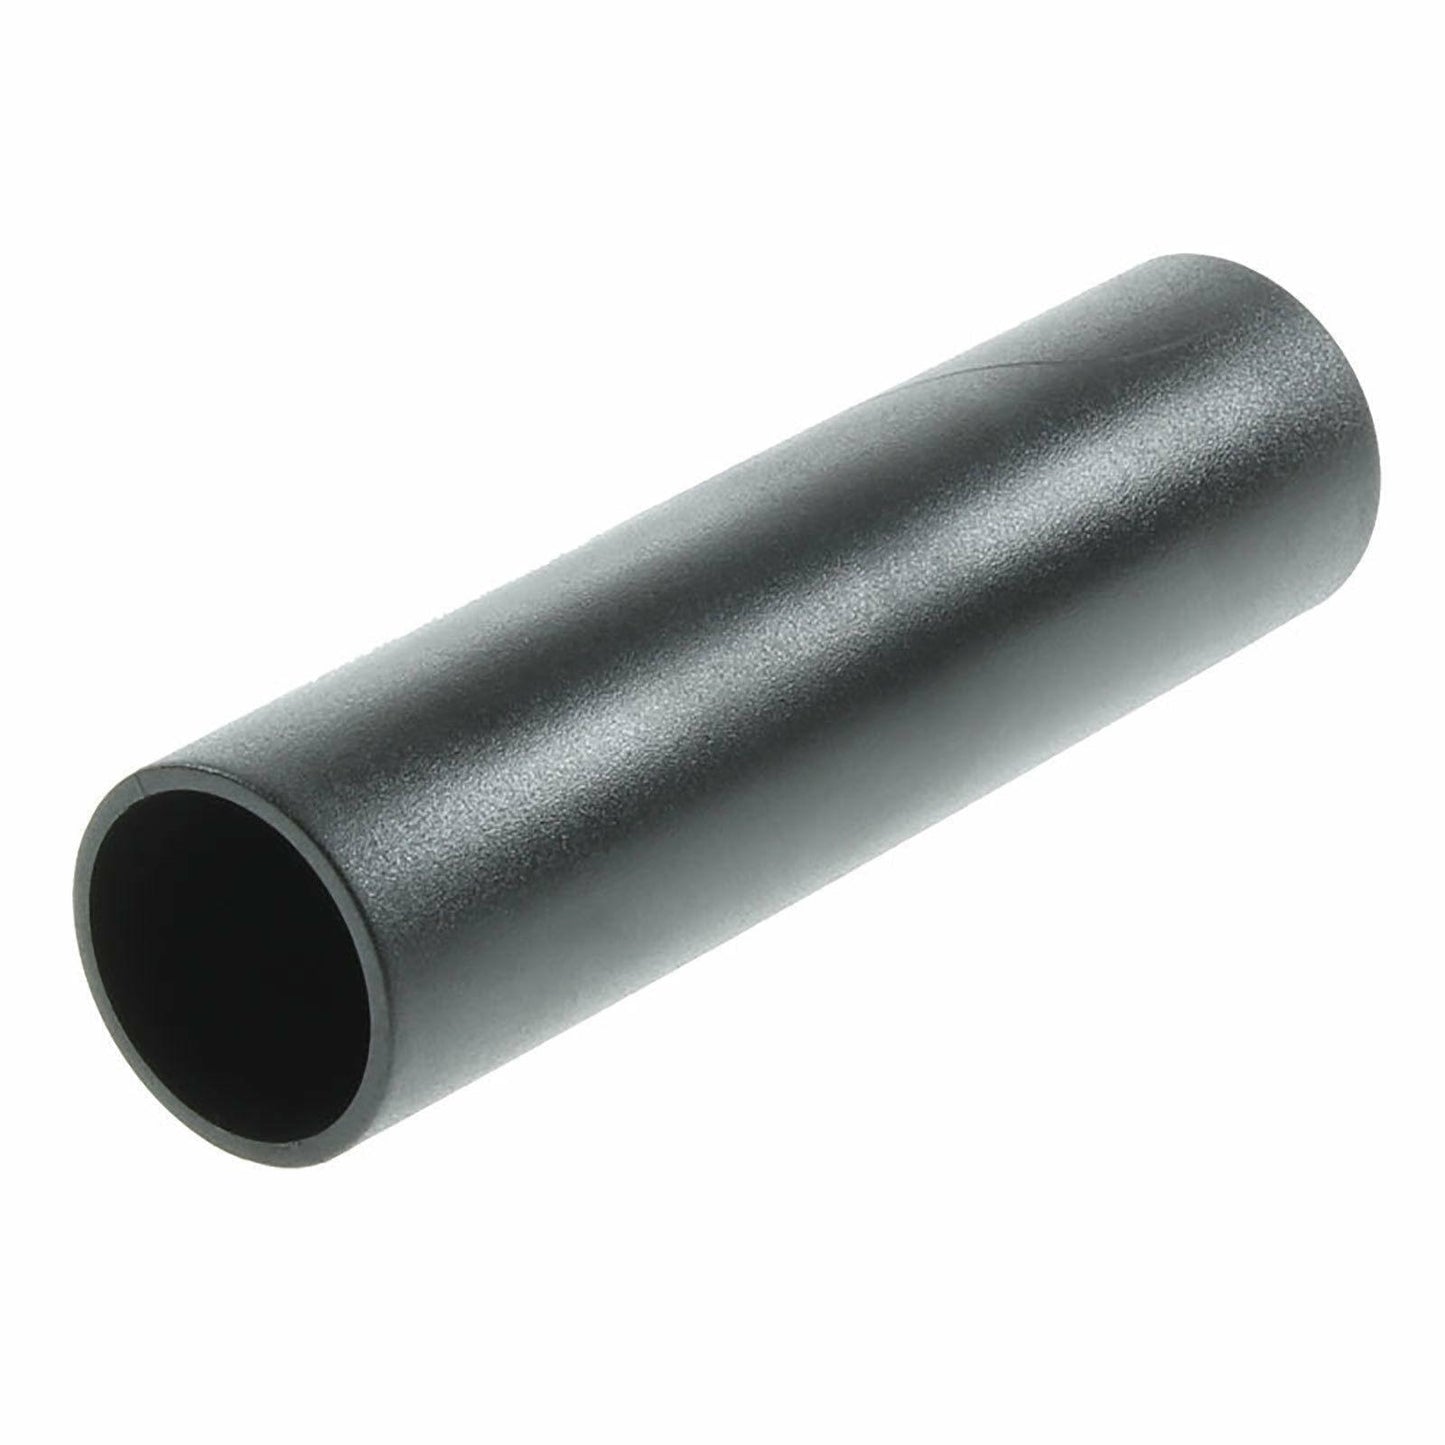 Henry Hoover Tool Adaptor Tube - Compatible - Henry Hoover Parts